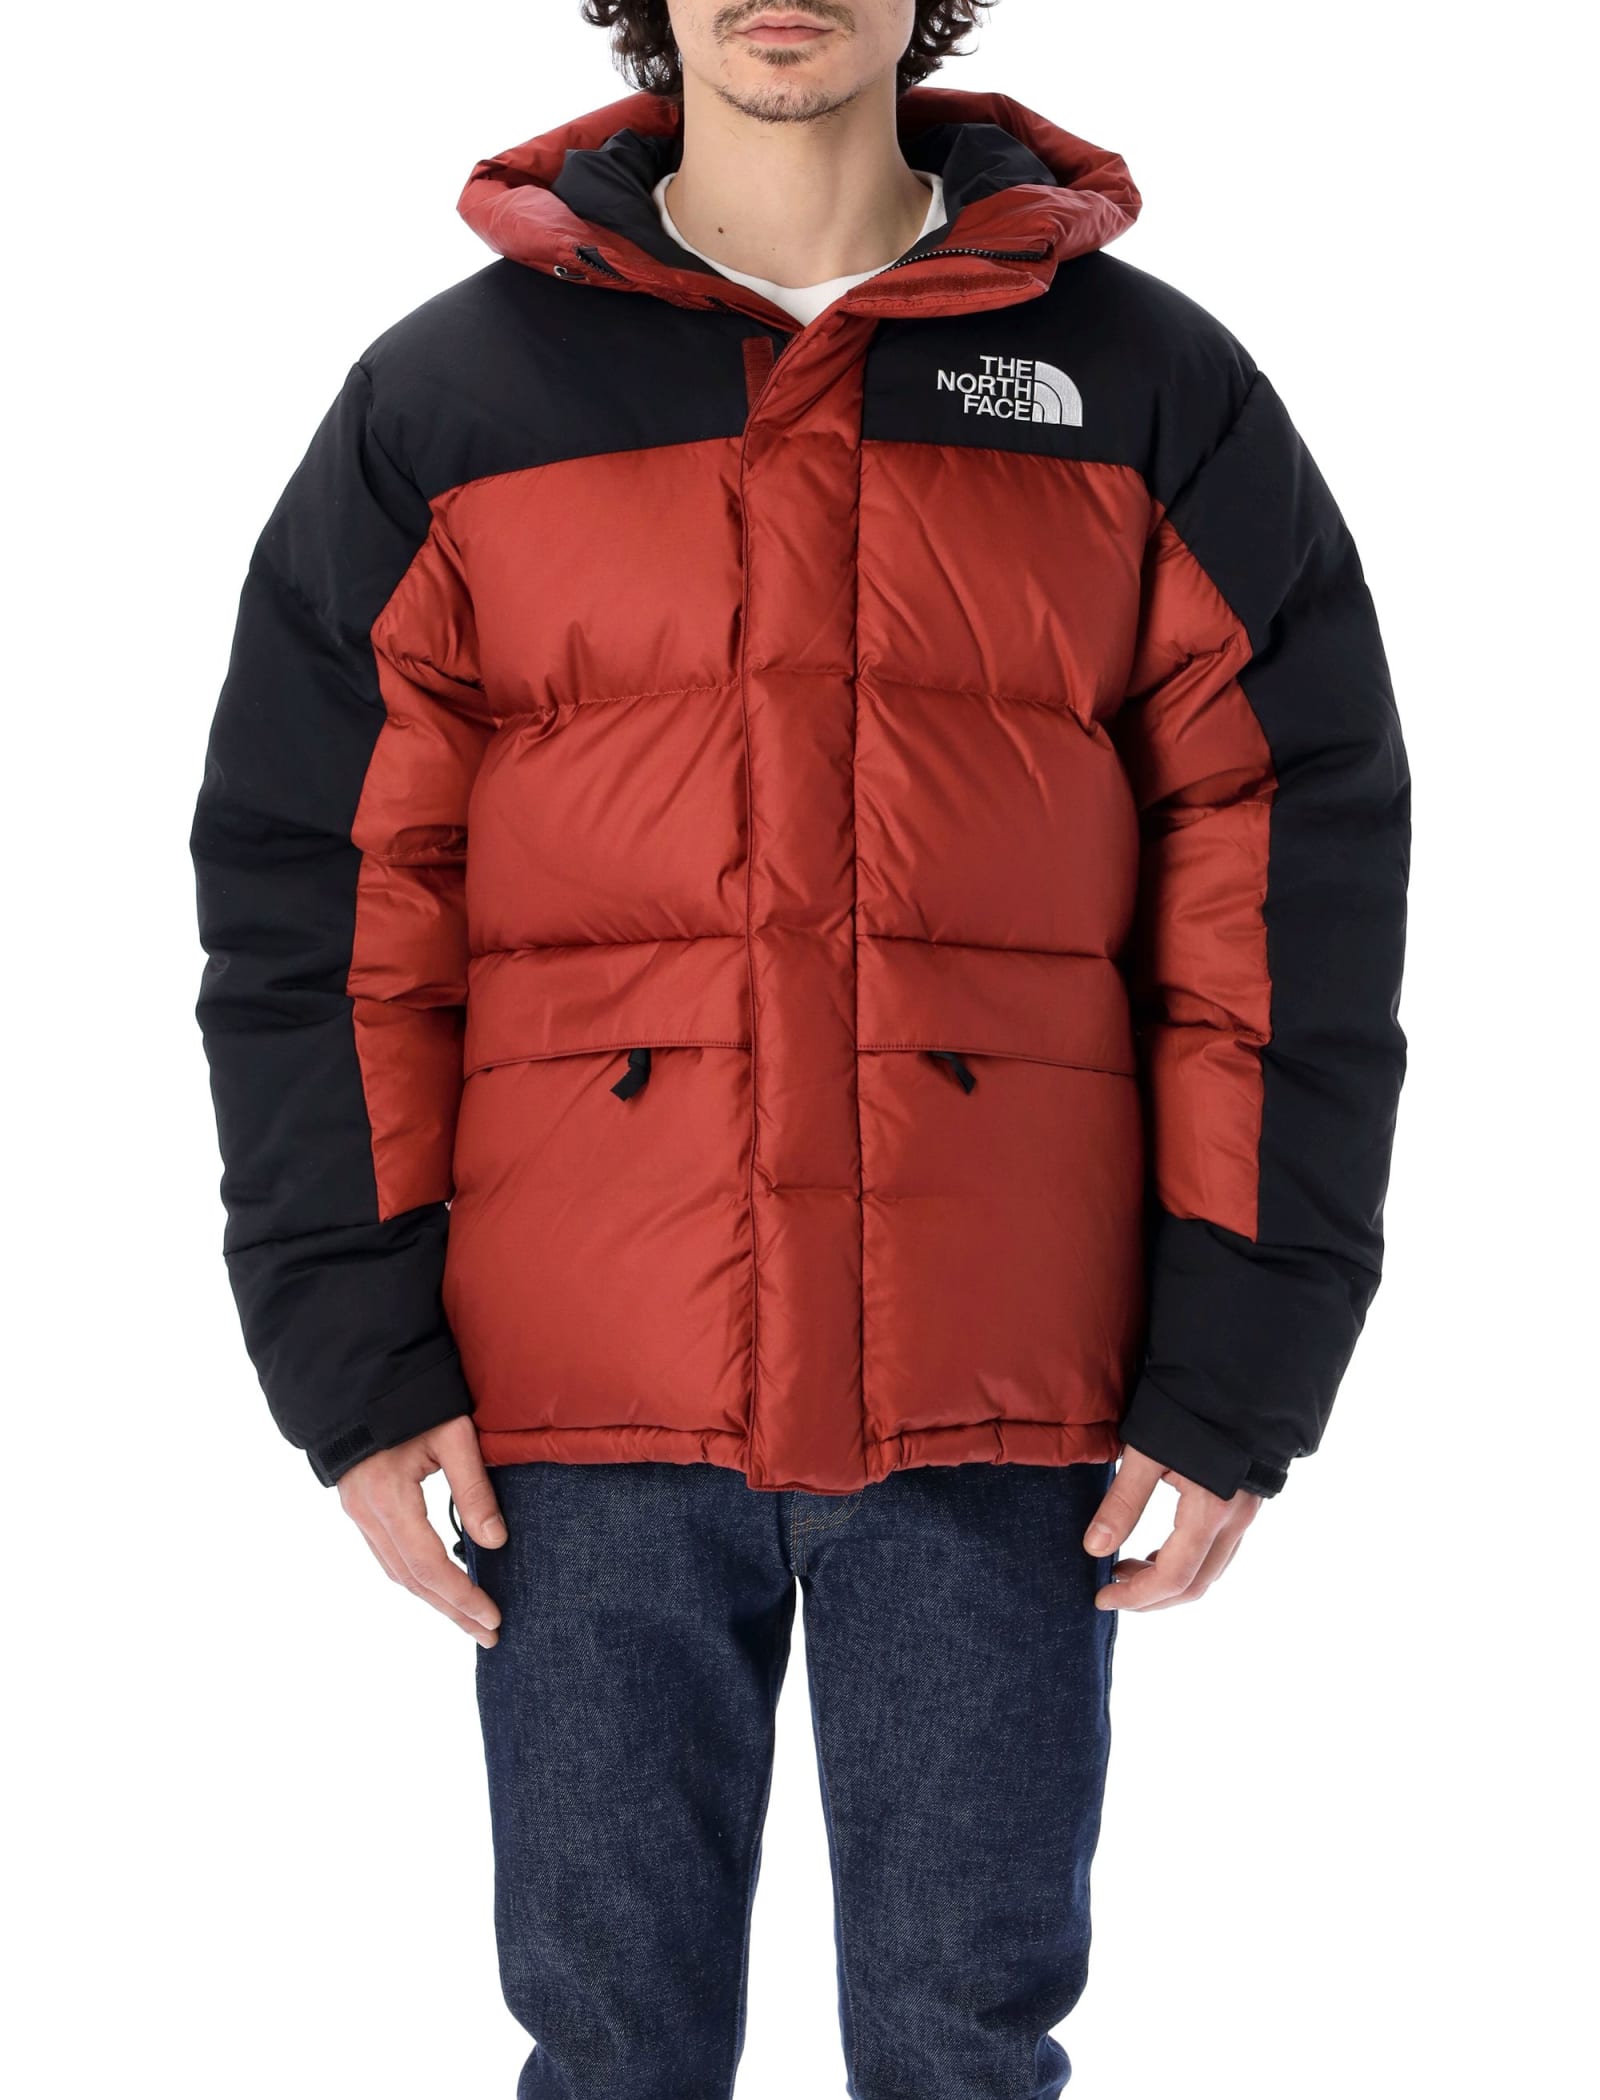 The North Face North Face Himalayan Insulated Parka